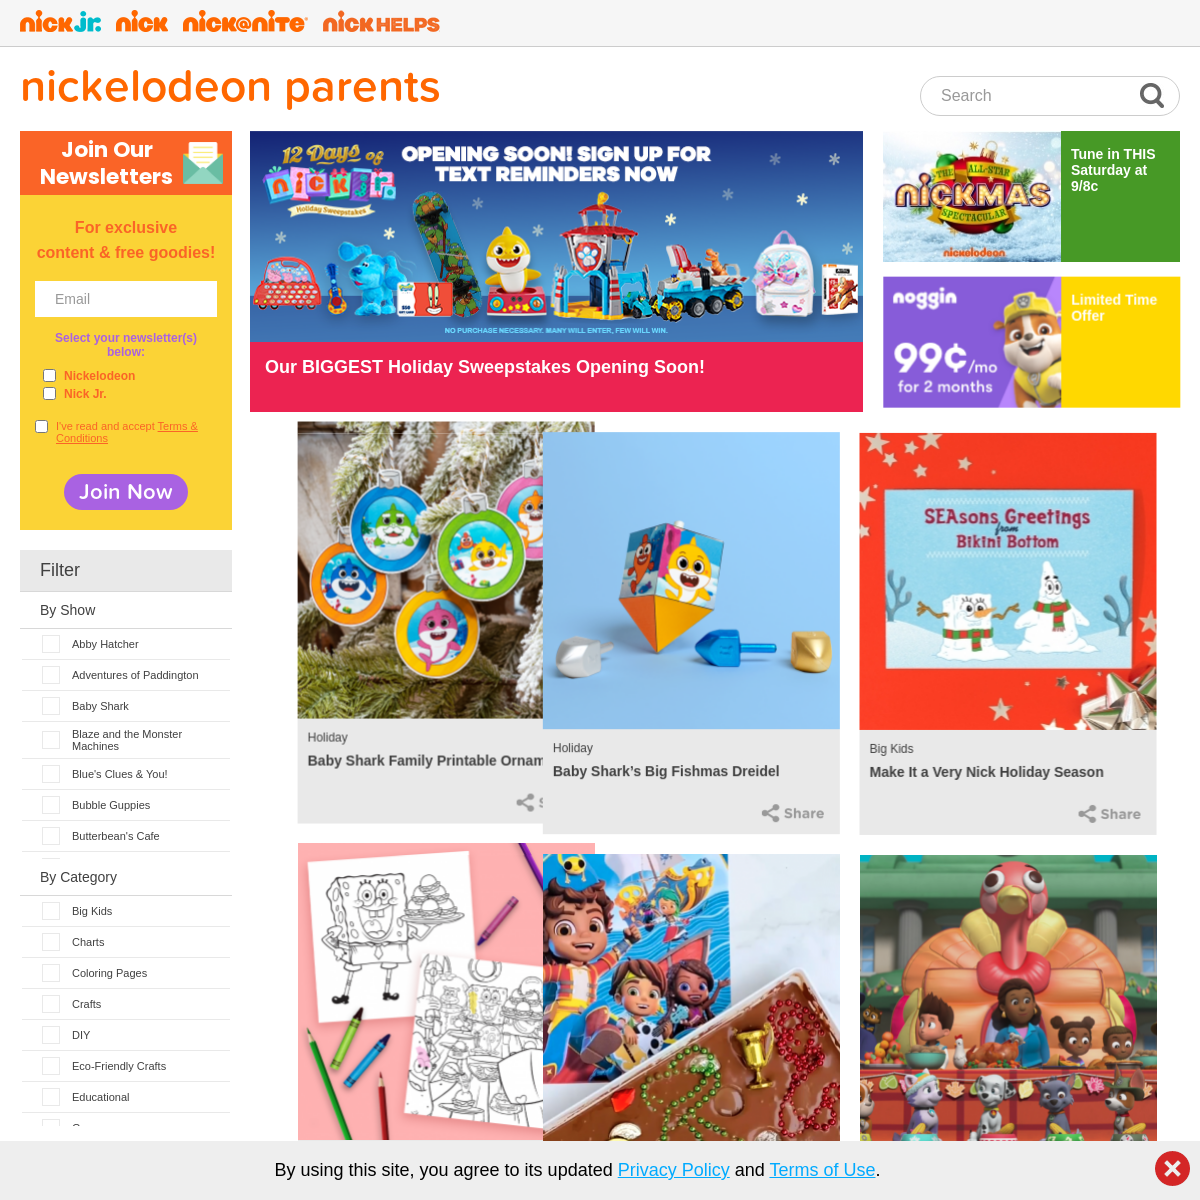 A complete backup of nickelodeonparents.com